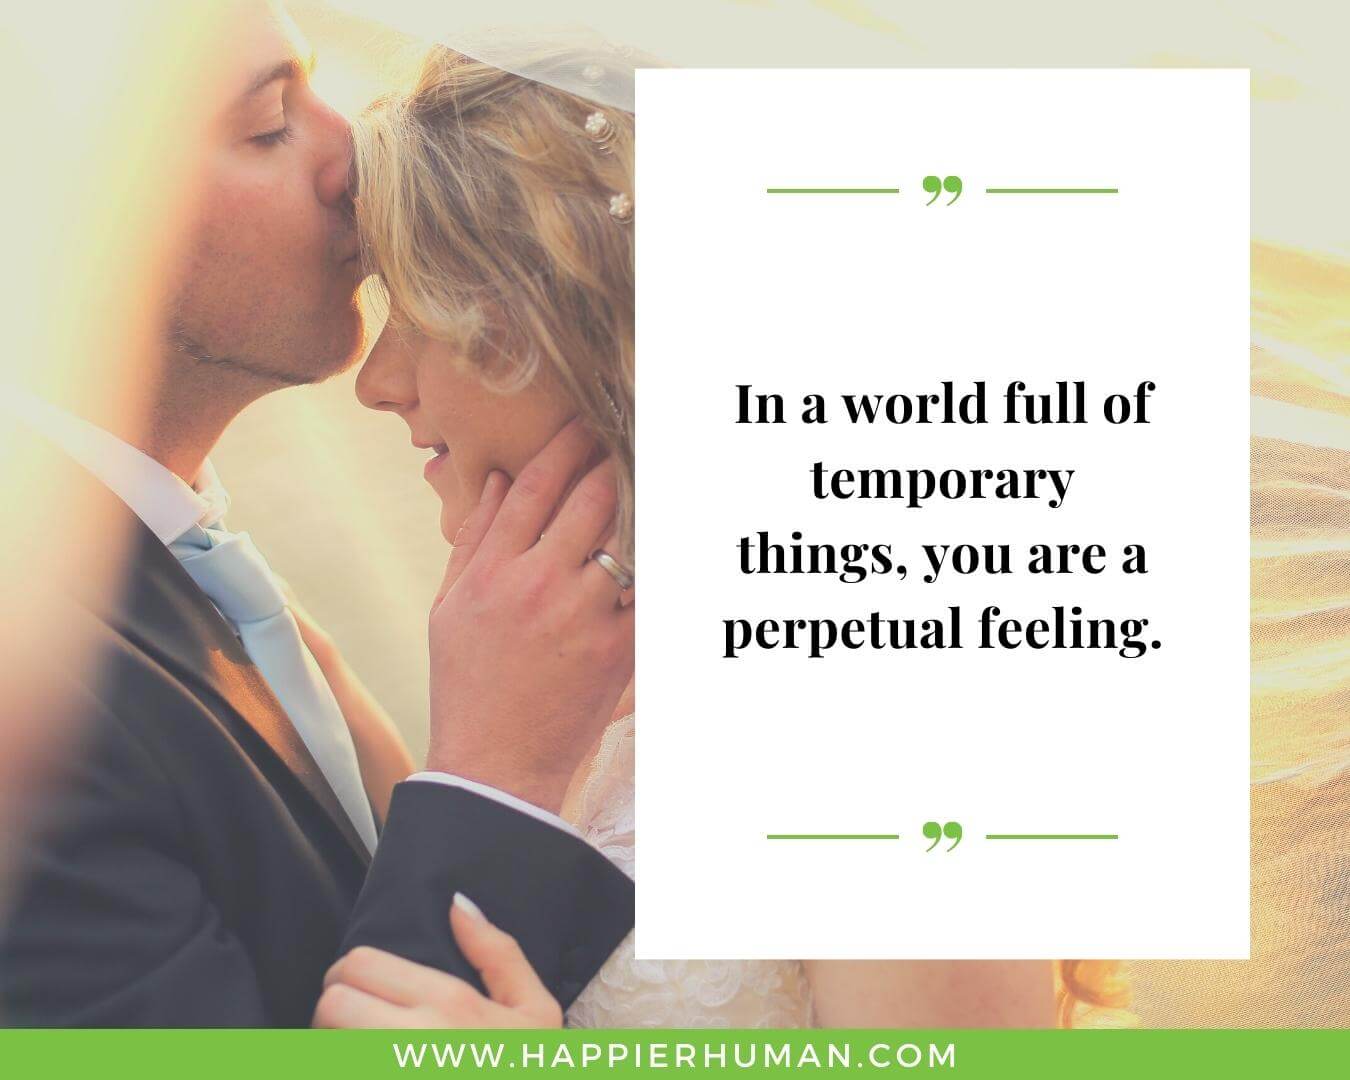 Wise Words of Love for Her - “In a world full of temporary things, you are a perpetual feeling.”